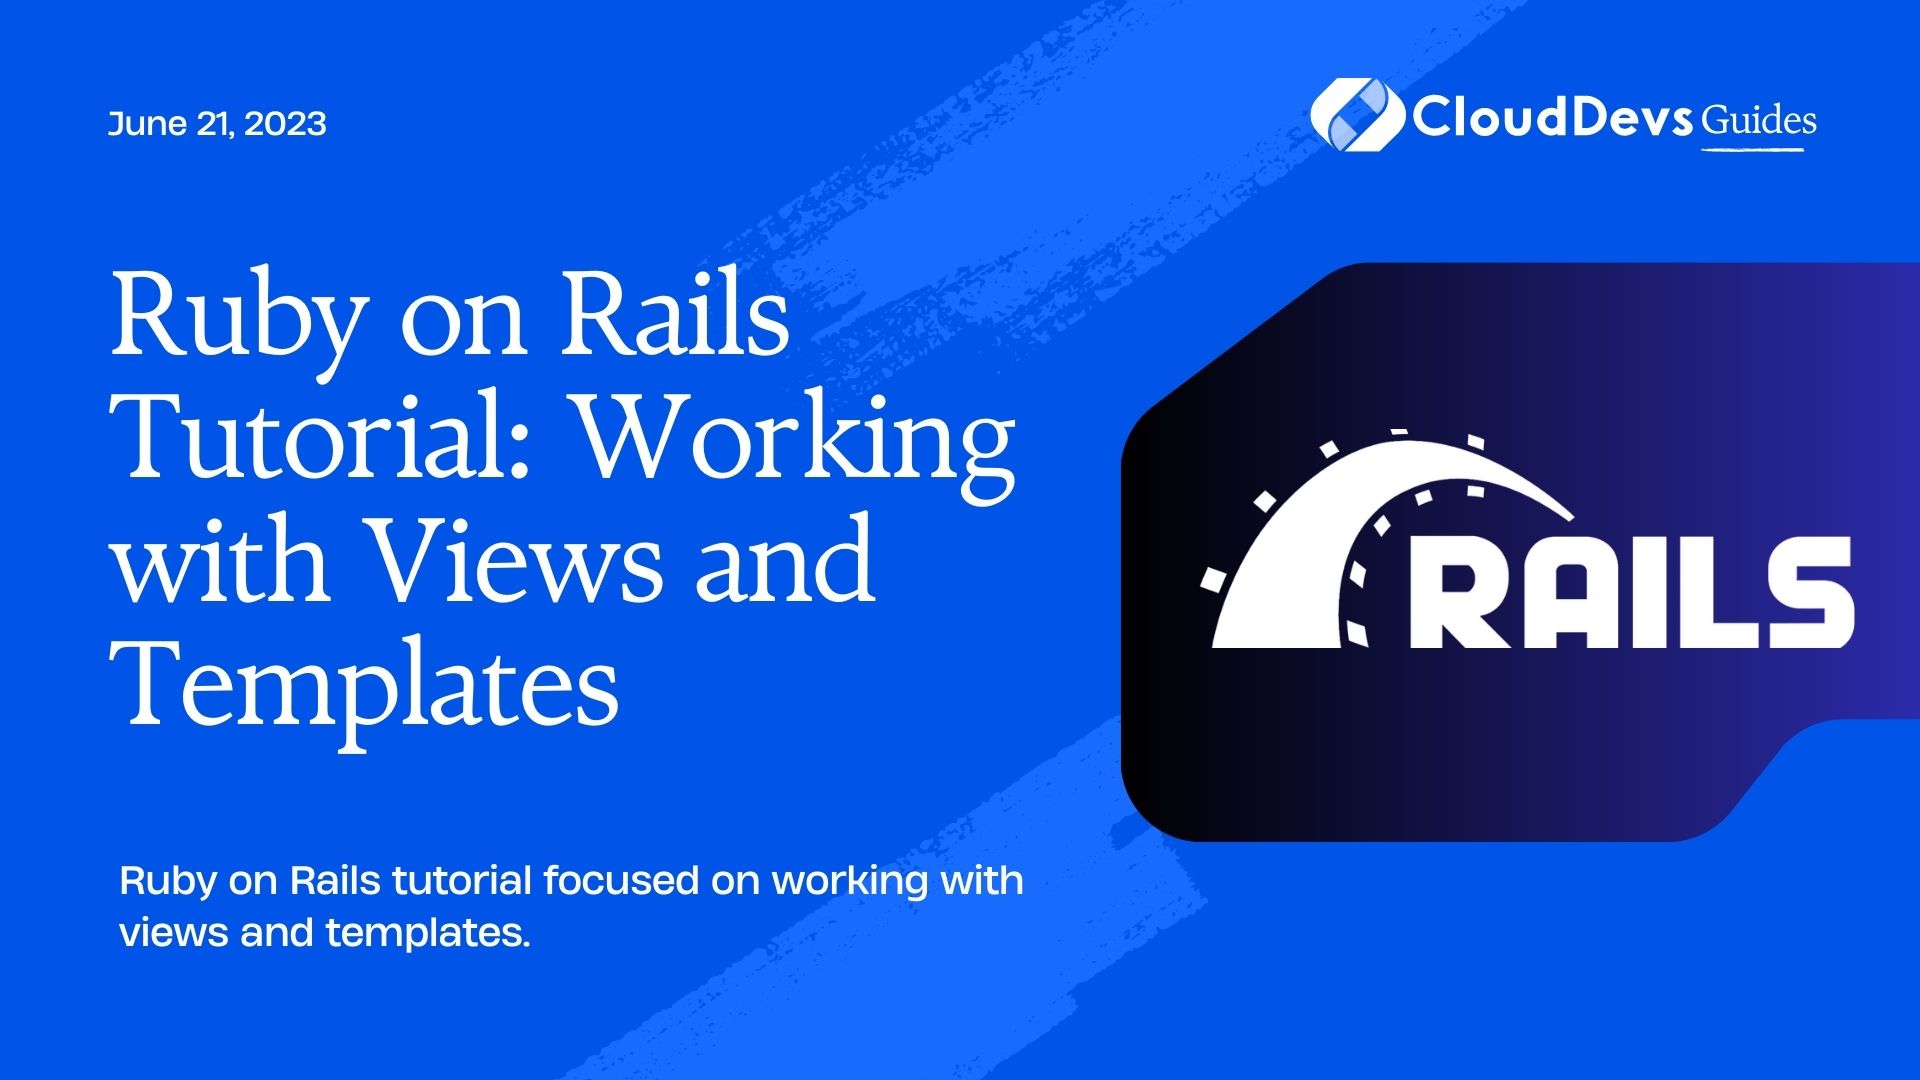 Working with Views and Templates on Ruby on Rails